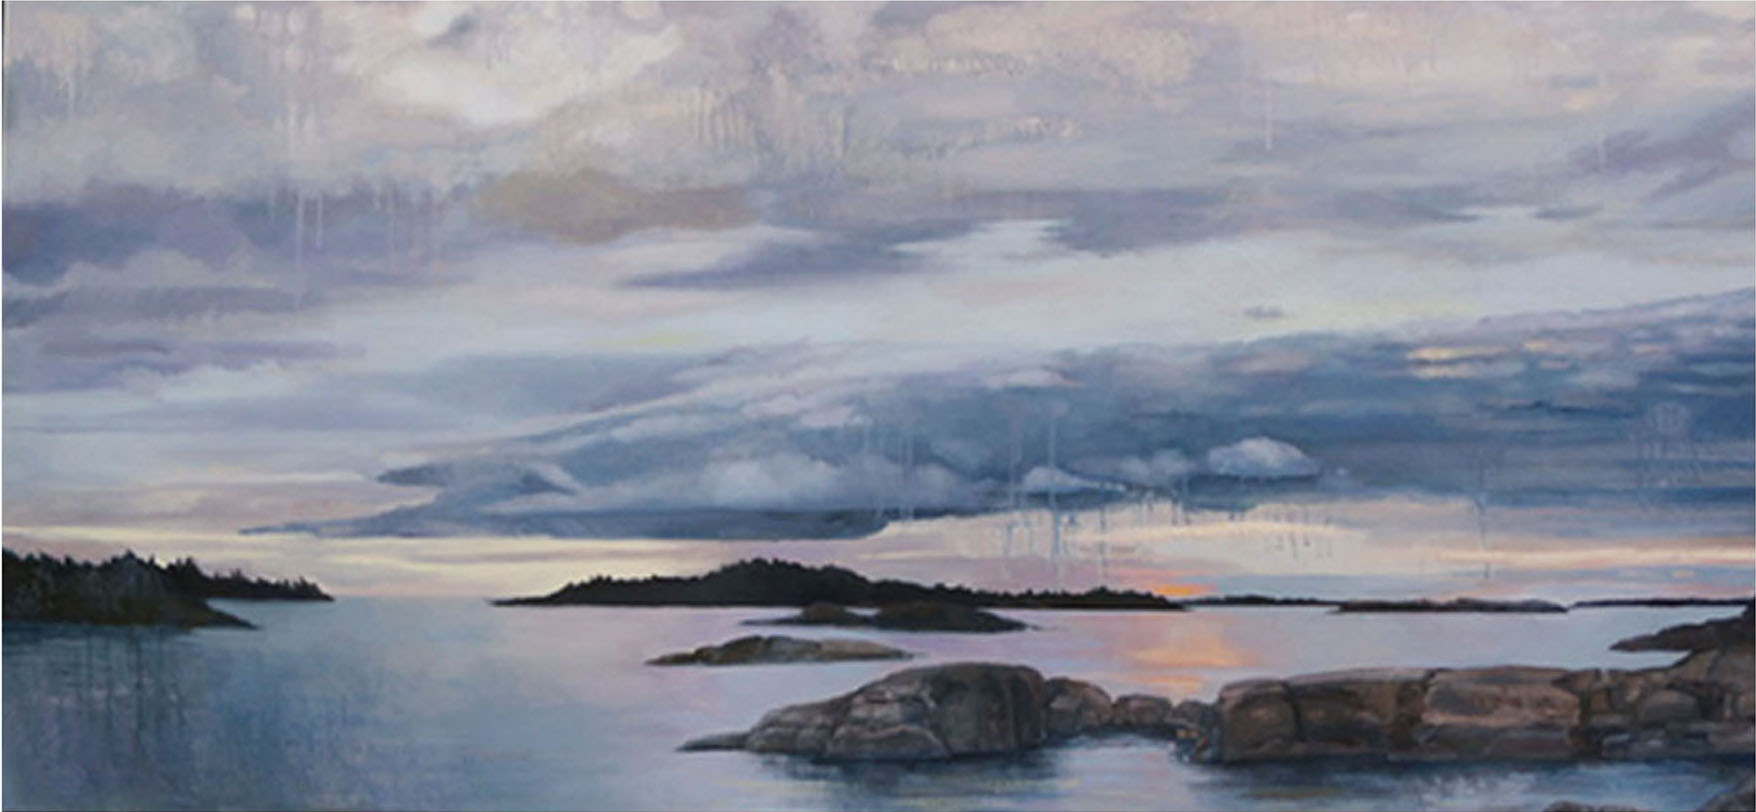 Islands Disappearing, oil and oil stick on canvas, 31 x 67 ½ inches, 2005